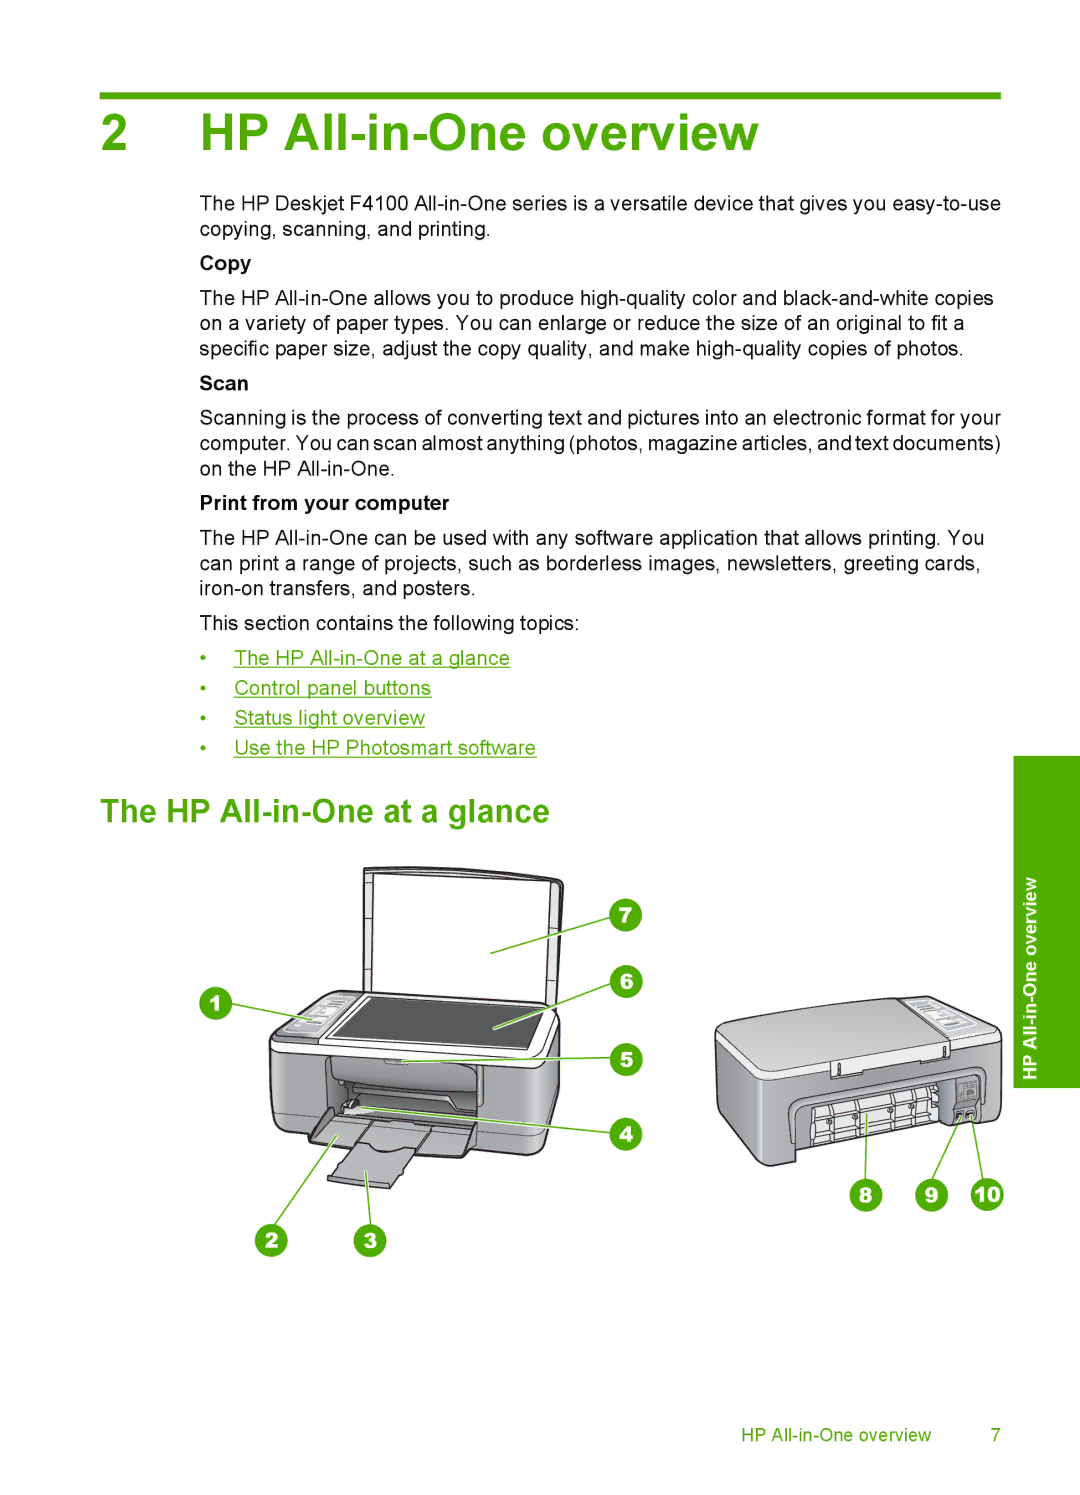 HP F4180, F4140, F4185, F4172, F4190 HP All-in-One overview, HP All-in-One at a glance, Copy, Scan, Print from your computer 